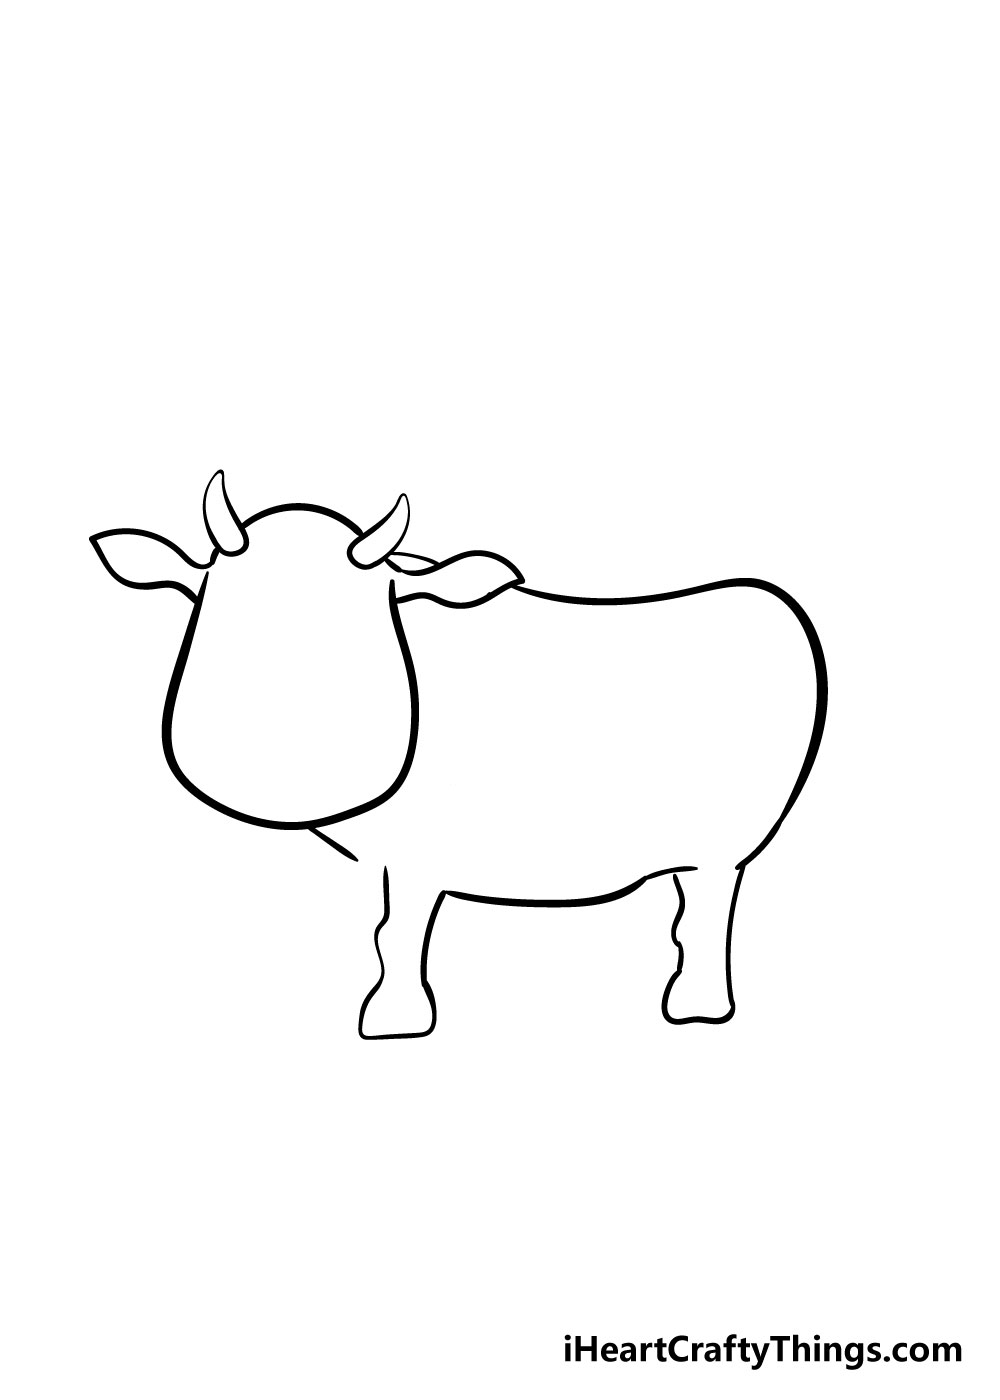 Cow sketch doodle hand drawn Royalty Free Vector Image-gemektower.com.vn